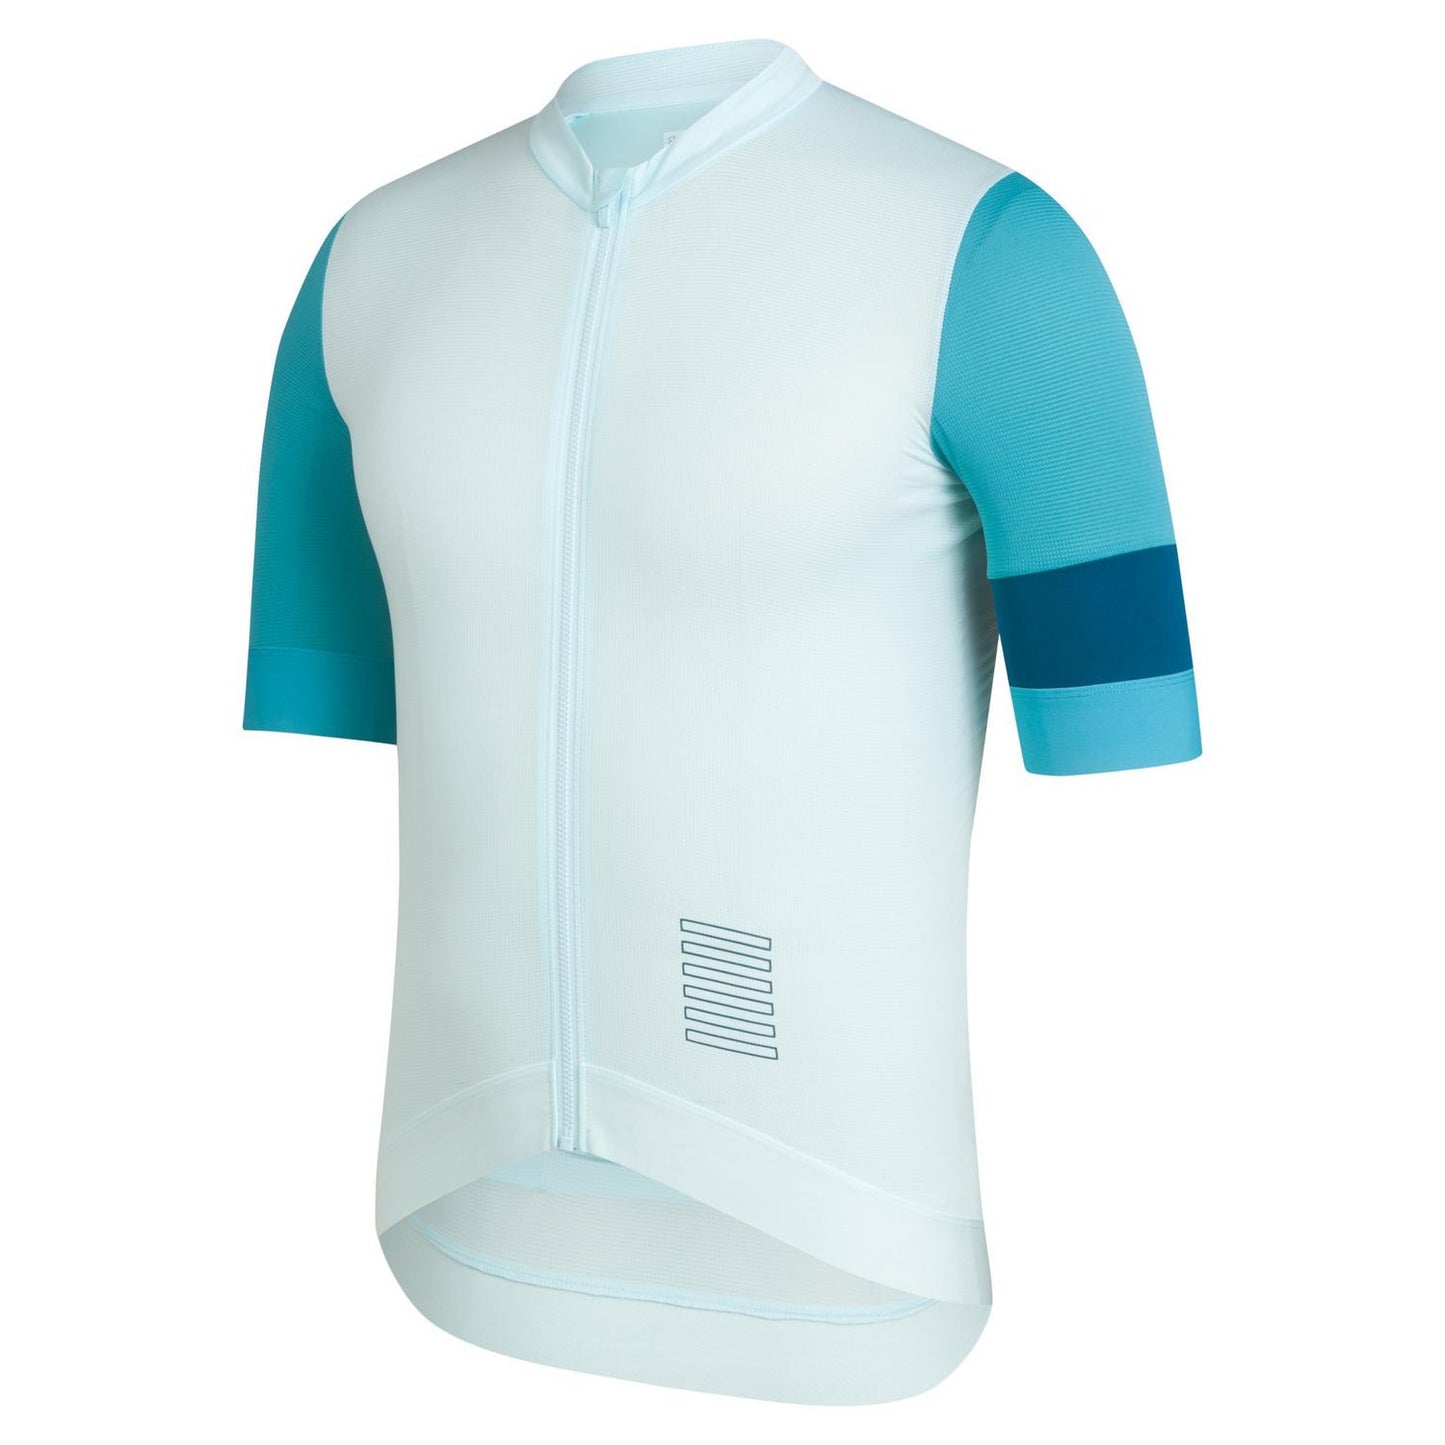 RAPHA Pro Team Training Jersey - IAL Pale Blue/Teal